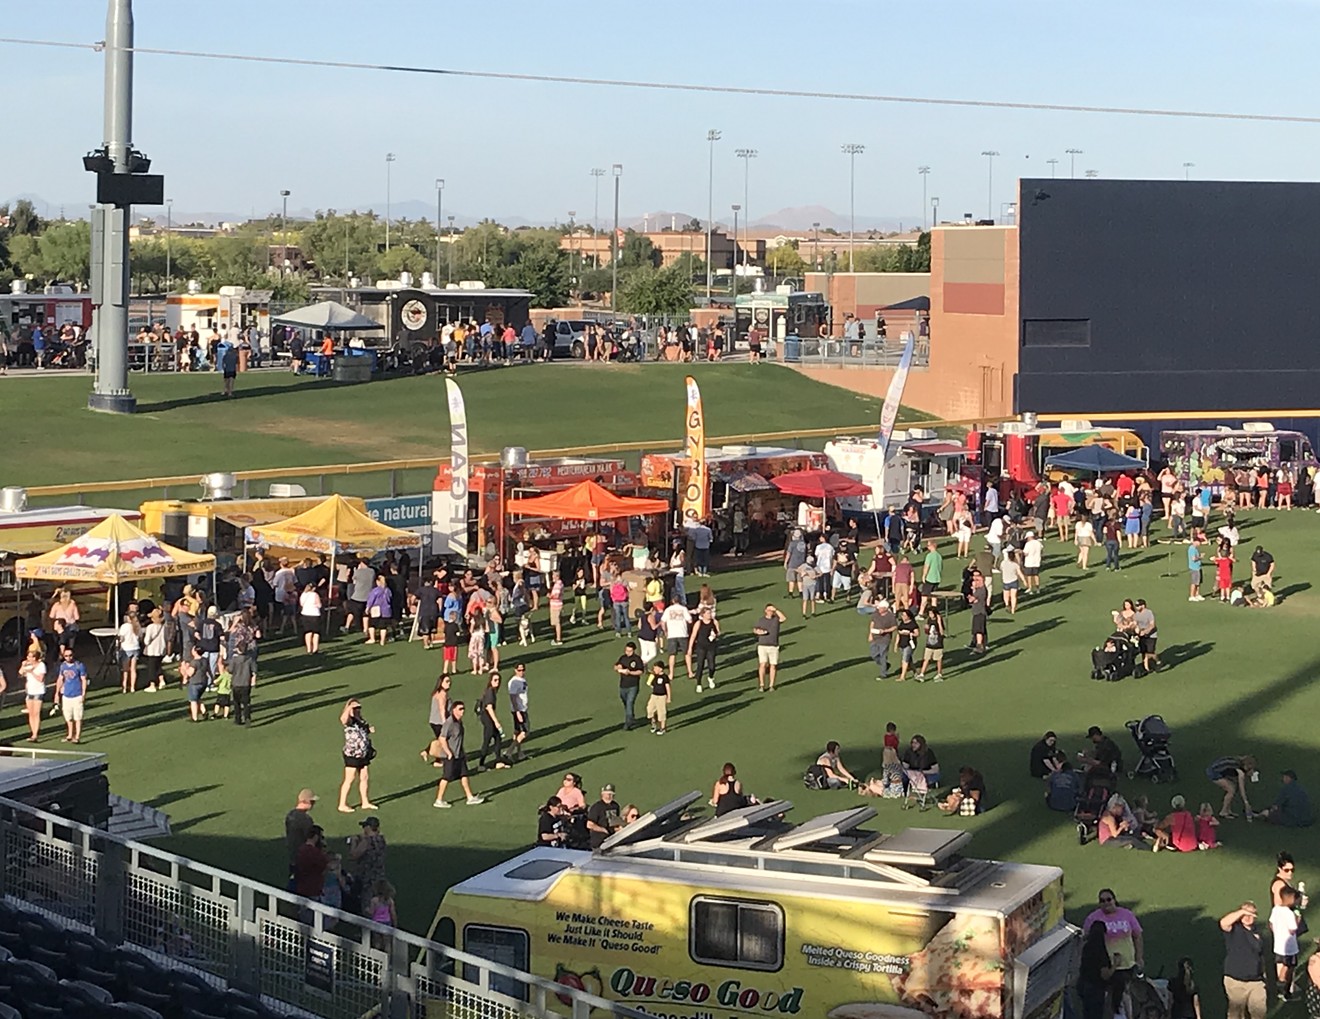 About 10,000 people are expected to attend Foodstock at the Peoria Sports Complex again this year.